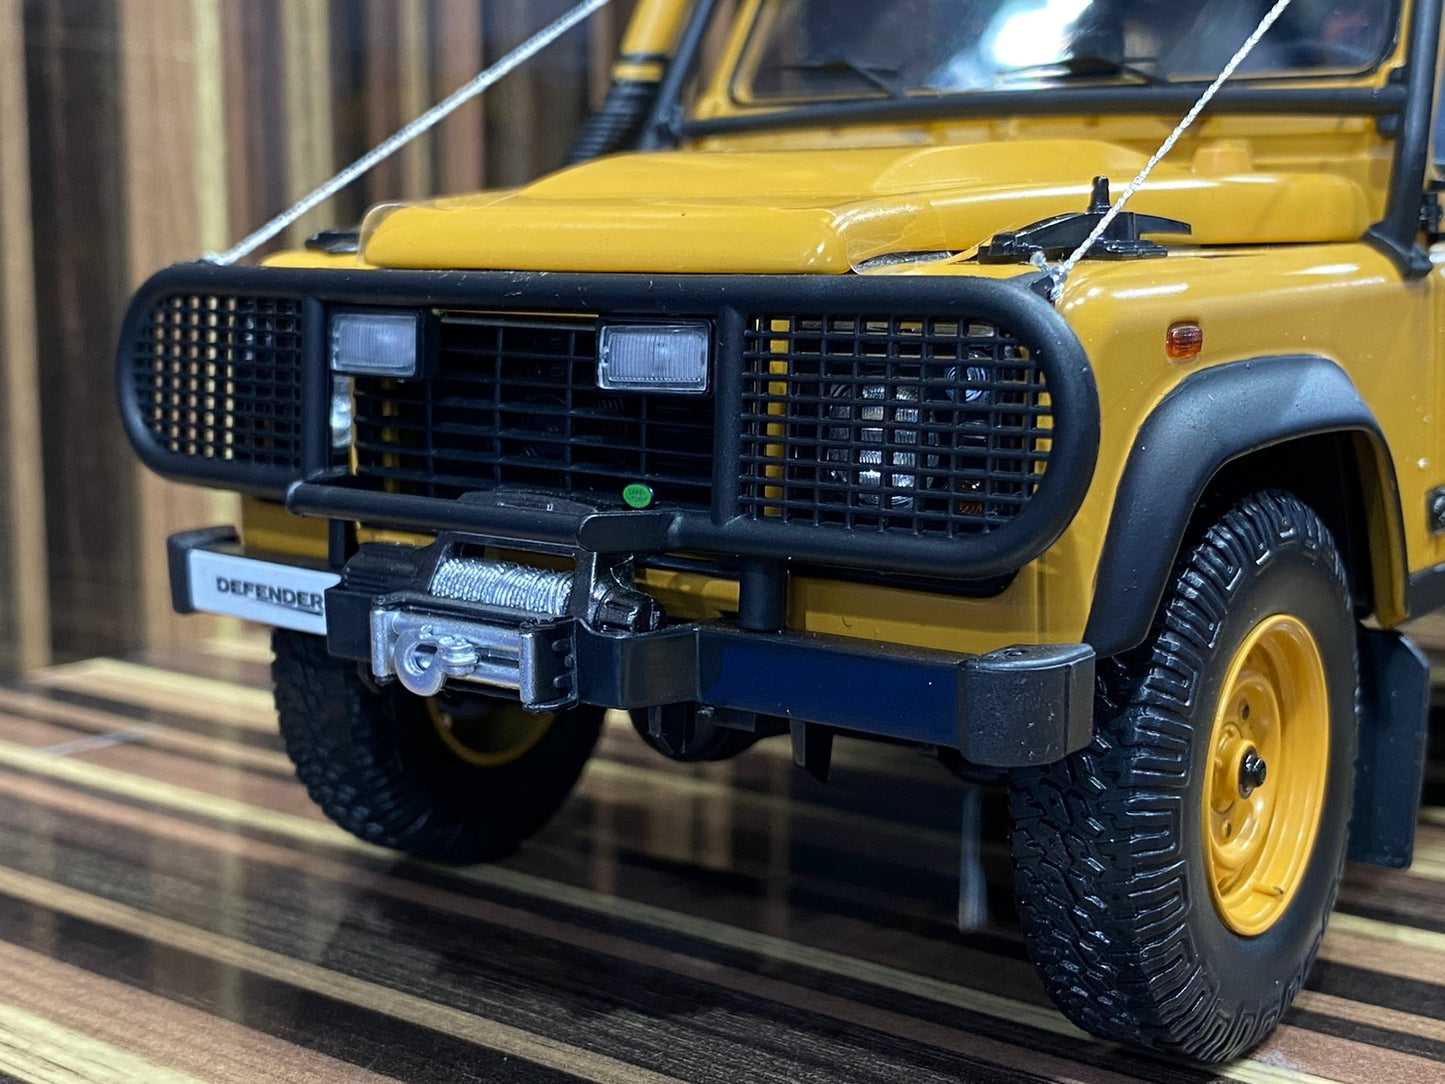 Land Rover Defender 90 Adventure 2007 1/18 Diecast car by Kyosho